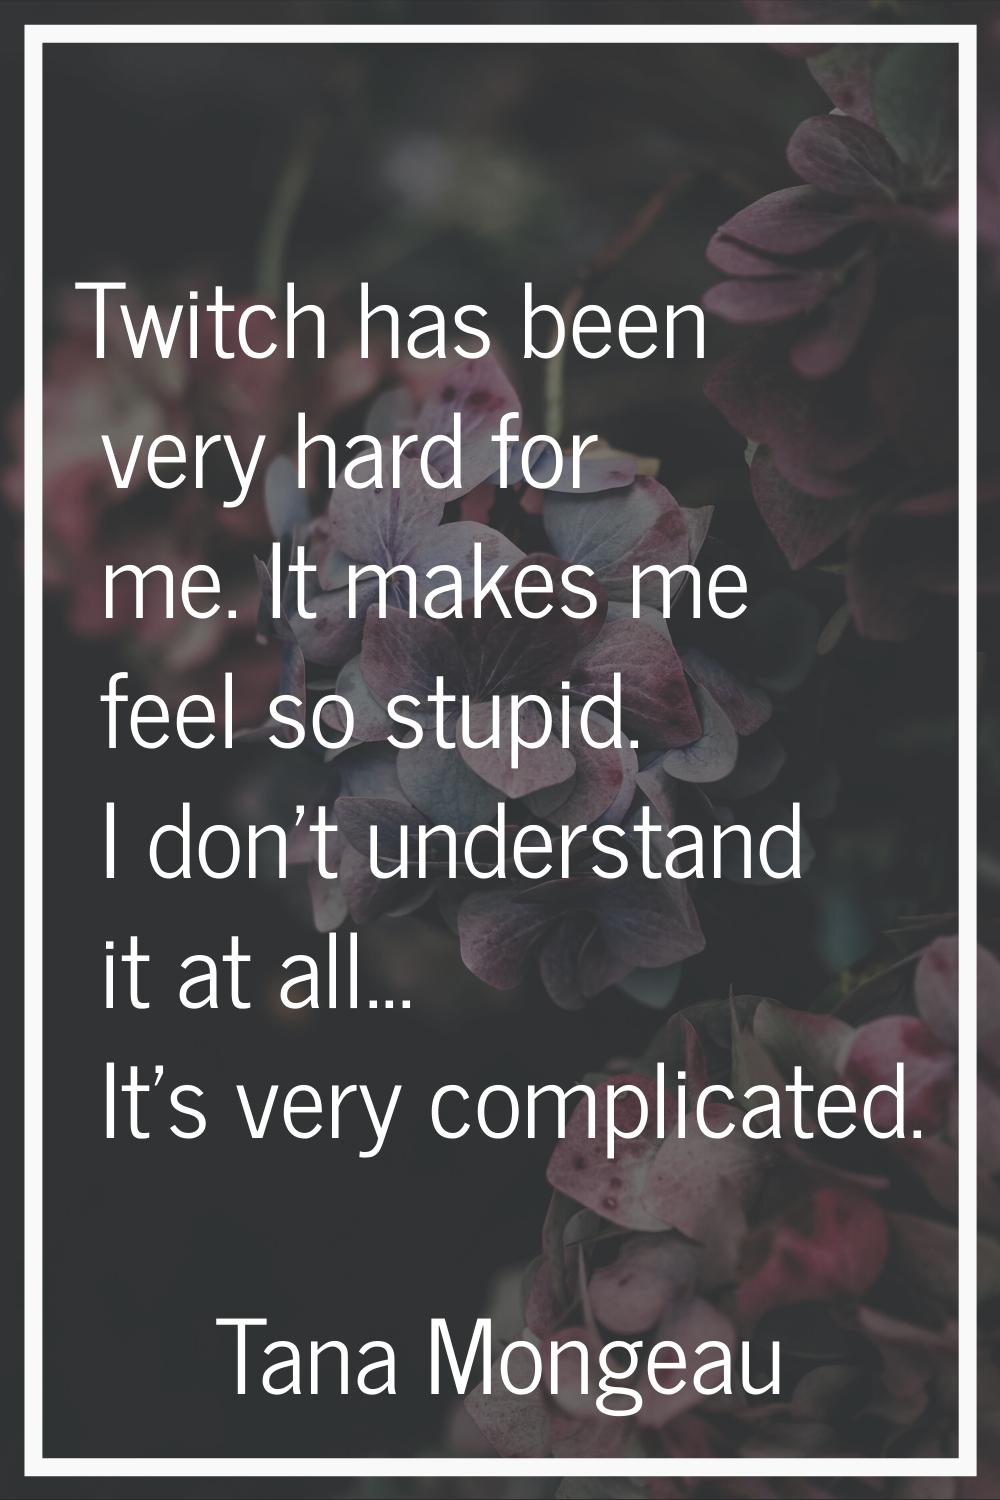 Twitch has been very hard for me. It makes me feel so stupid. I don't understand it at all... It's 